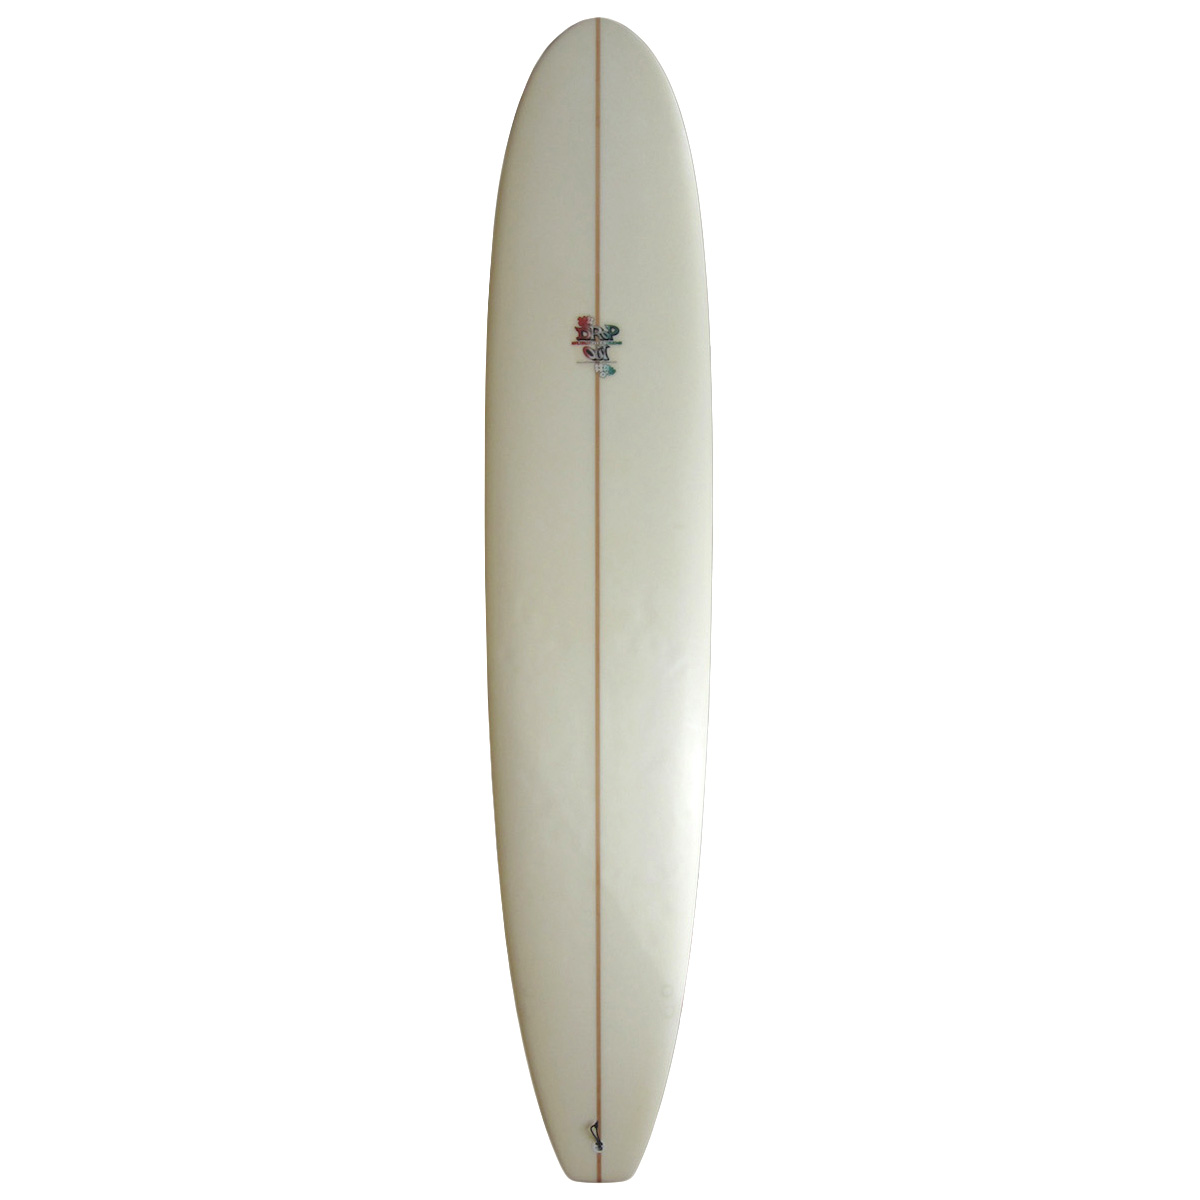 DROP OUT  / 9'6 Custom Noserider shaped by Abe